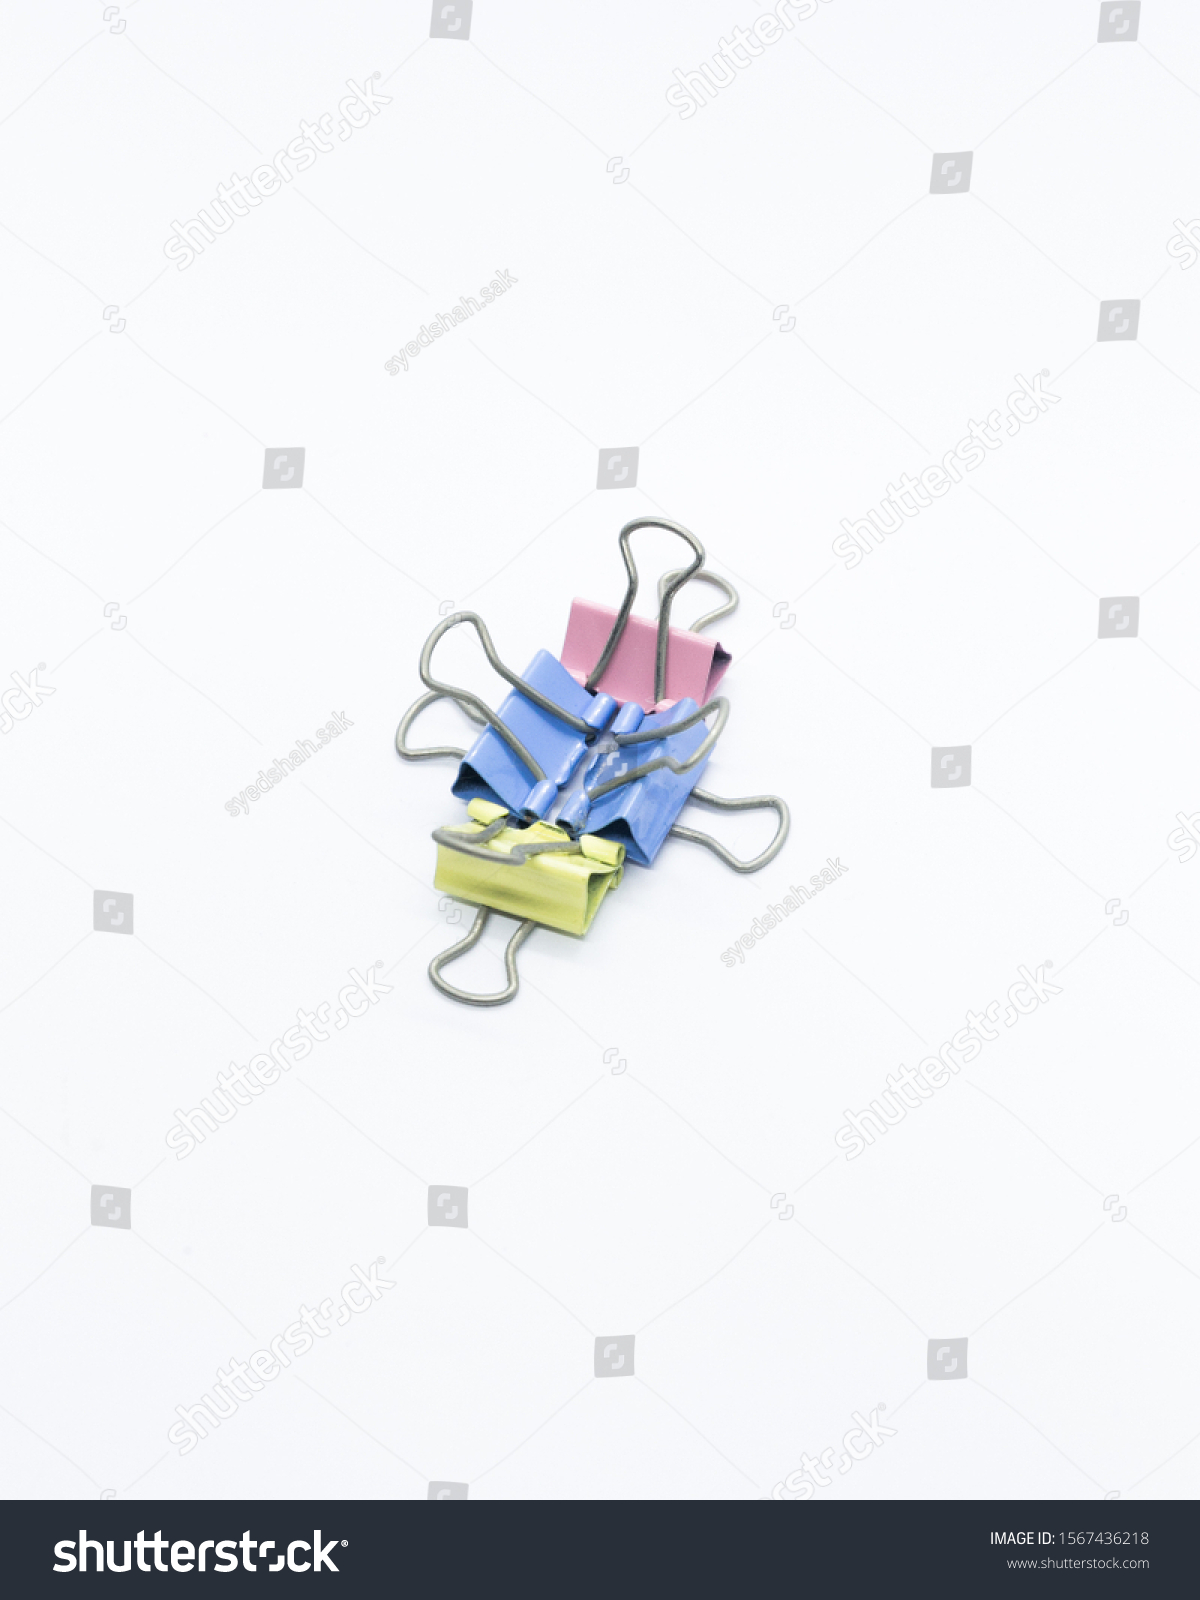 Paper Binder Clip creatively position that can illustrate a story #1567436218